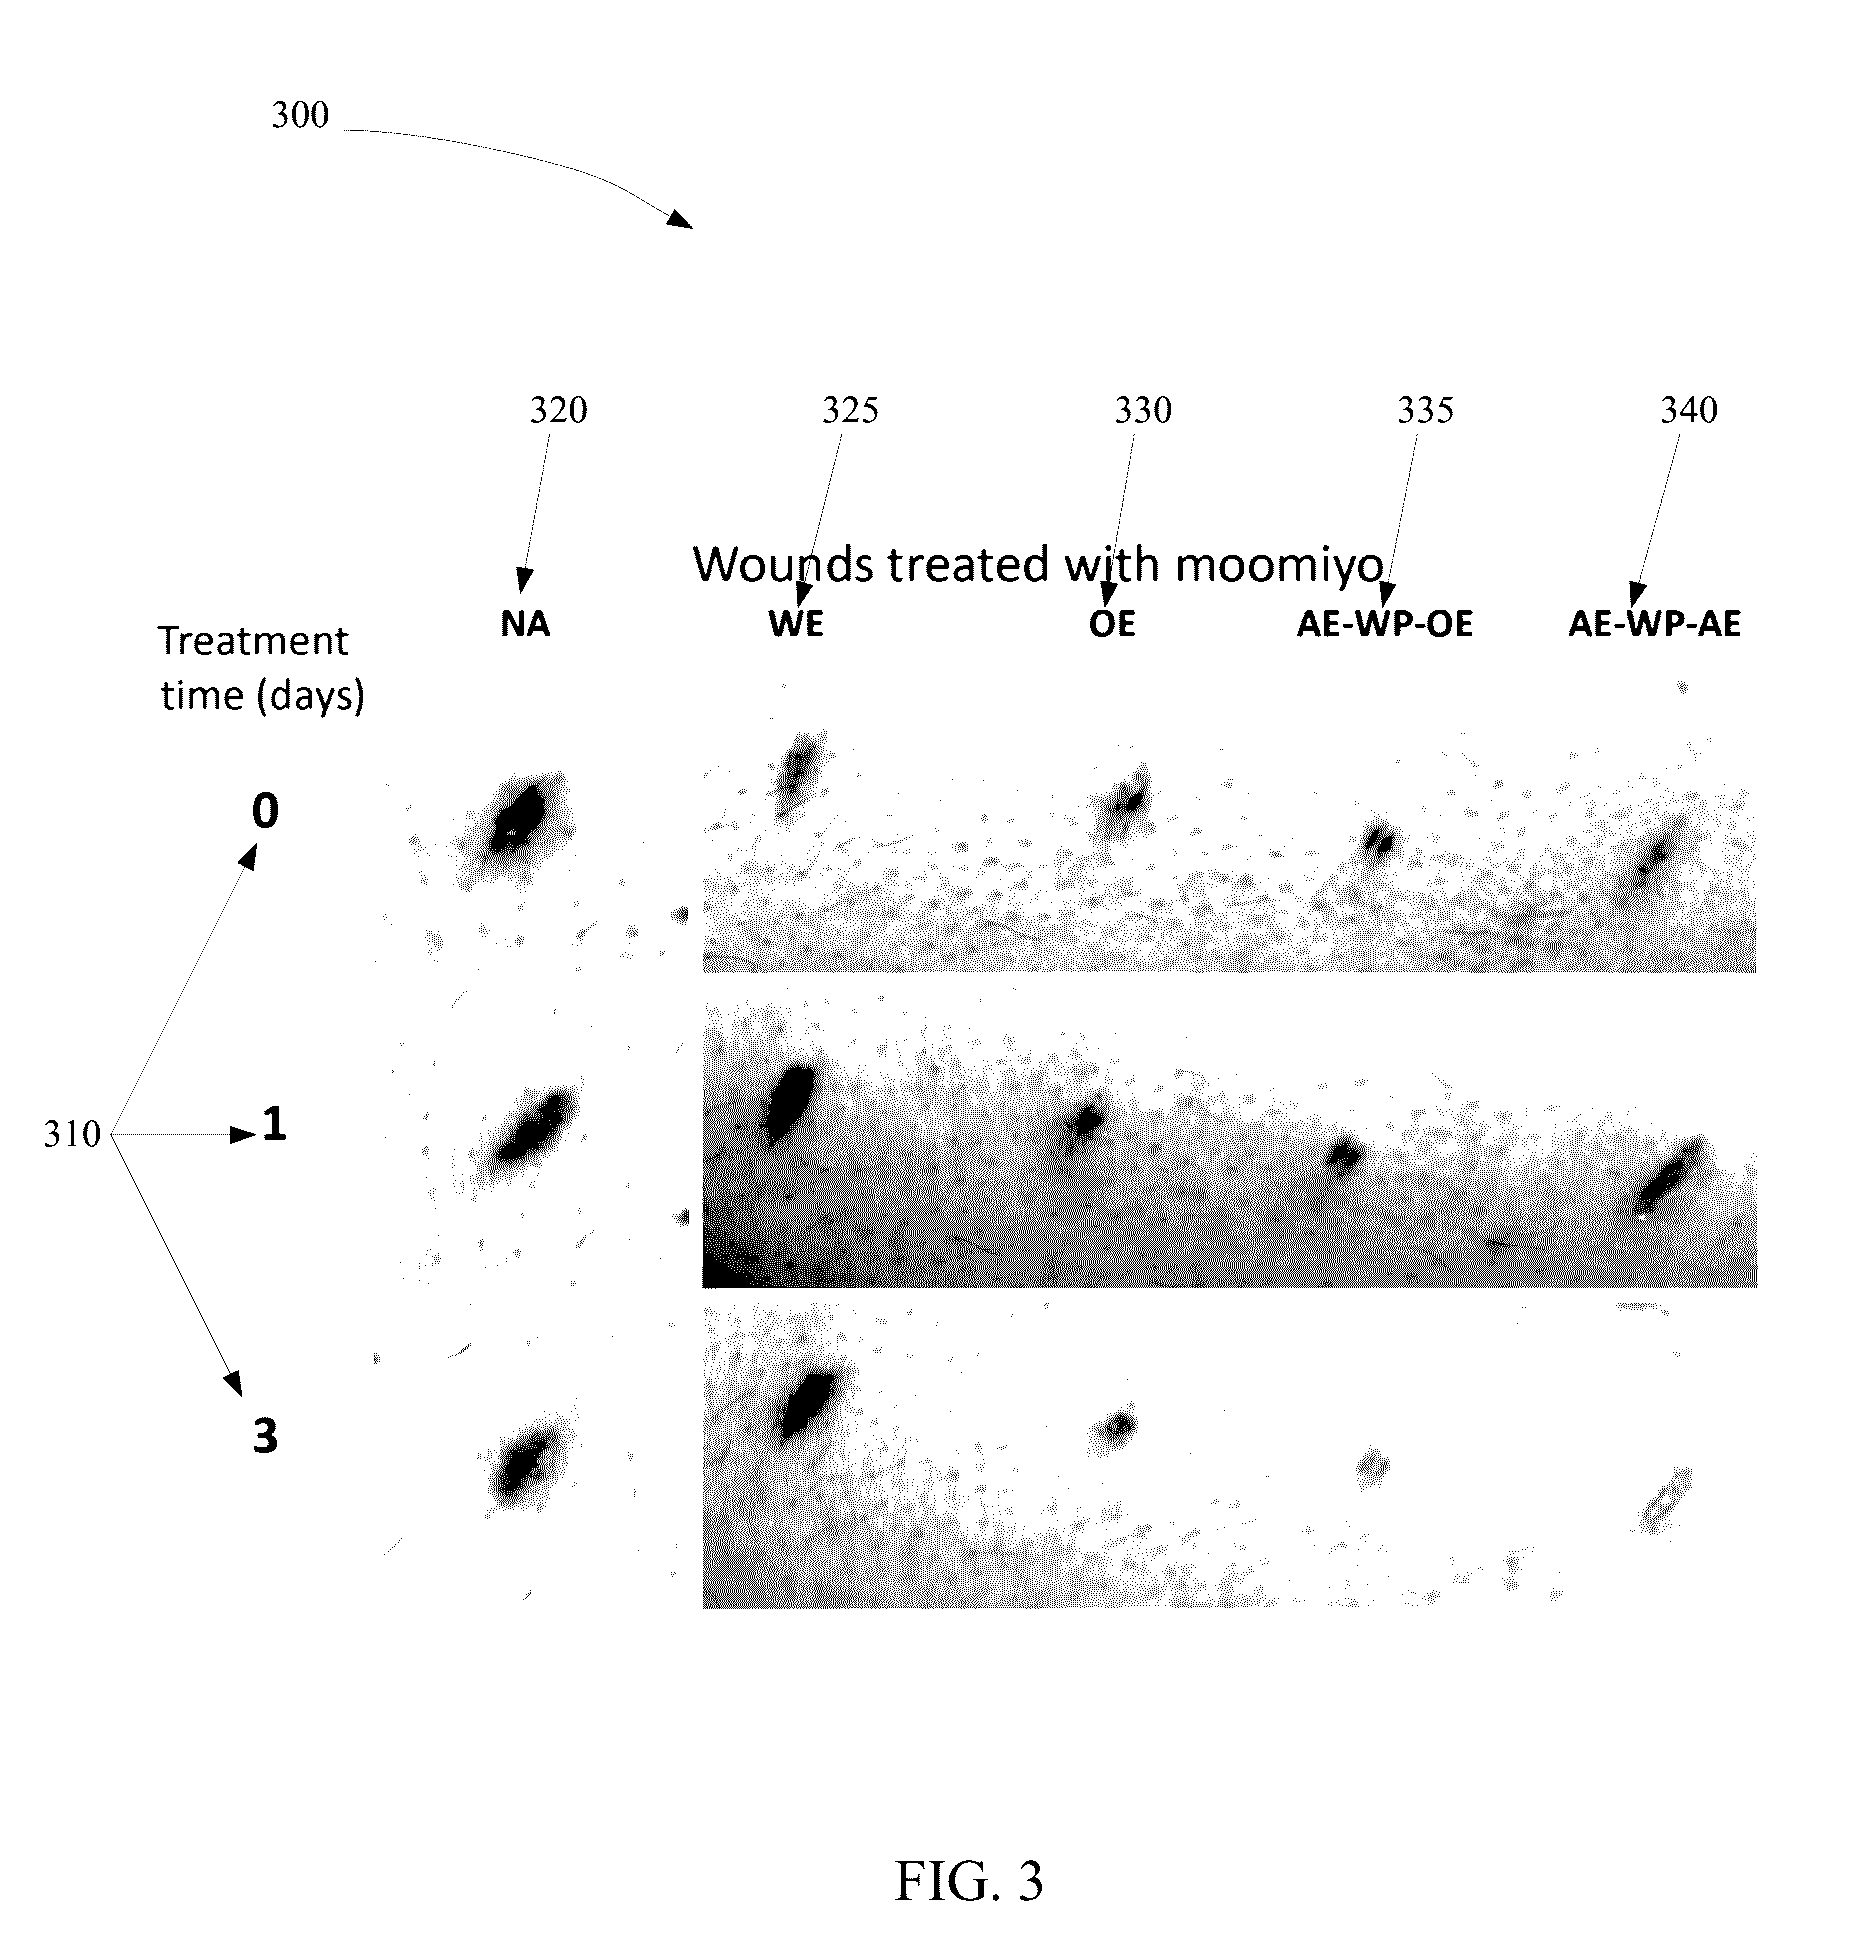 Method and system for extracting and using moomiyo compositions